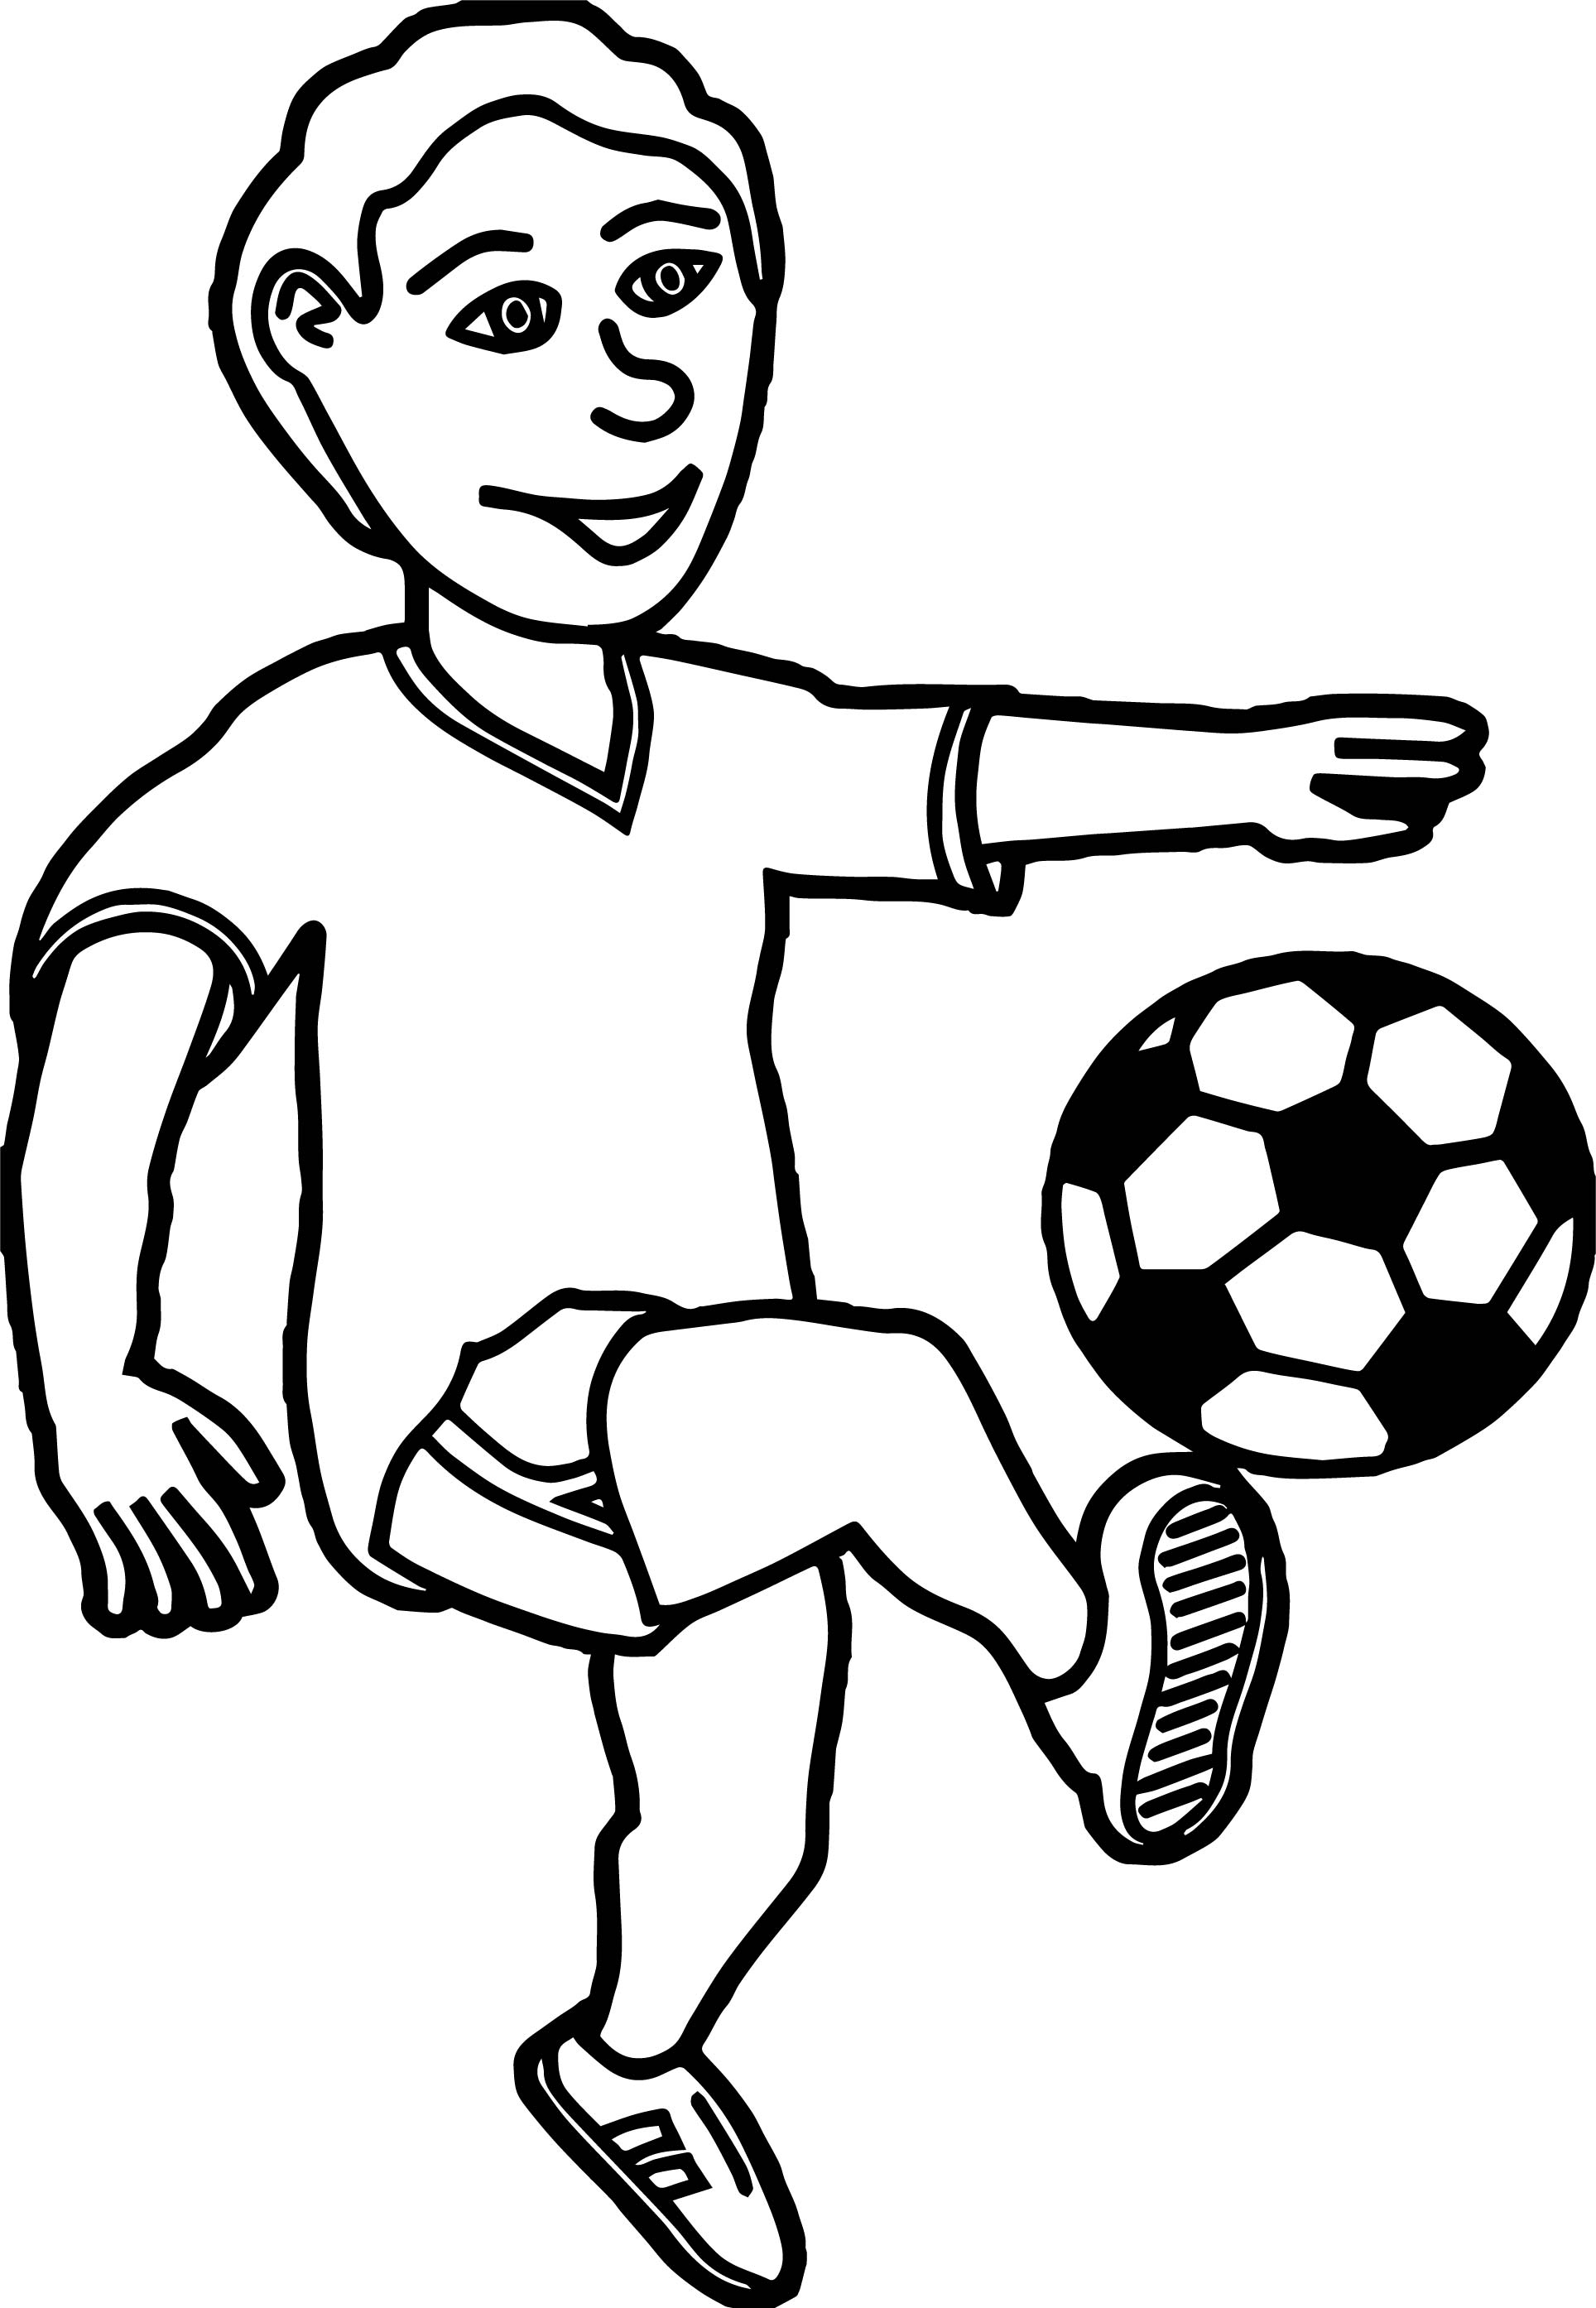 Soccer Playing Football Children Coloring Page